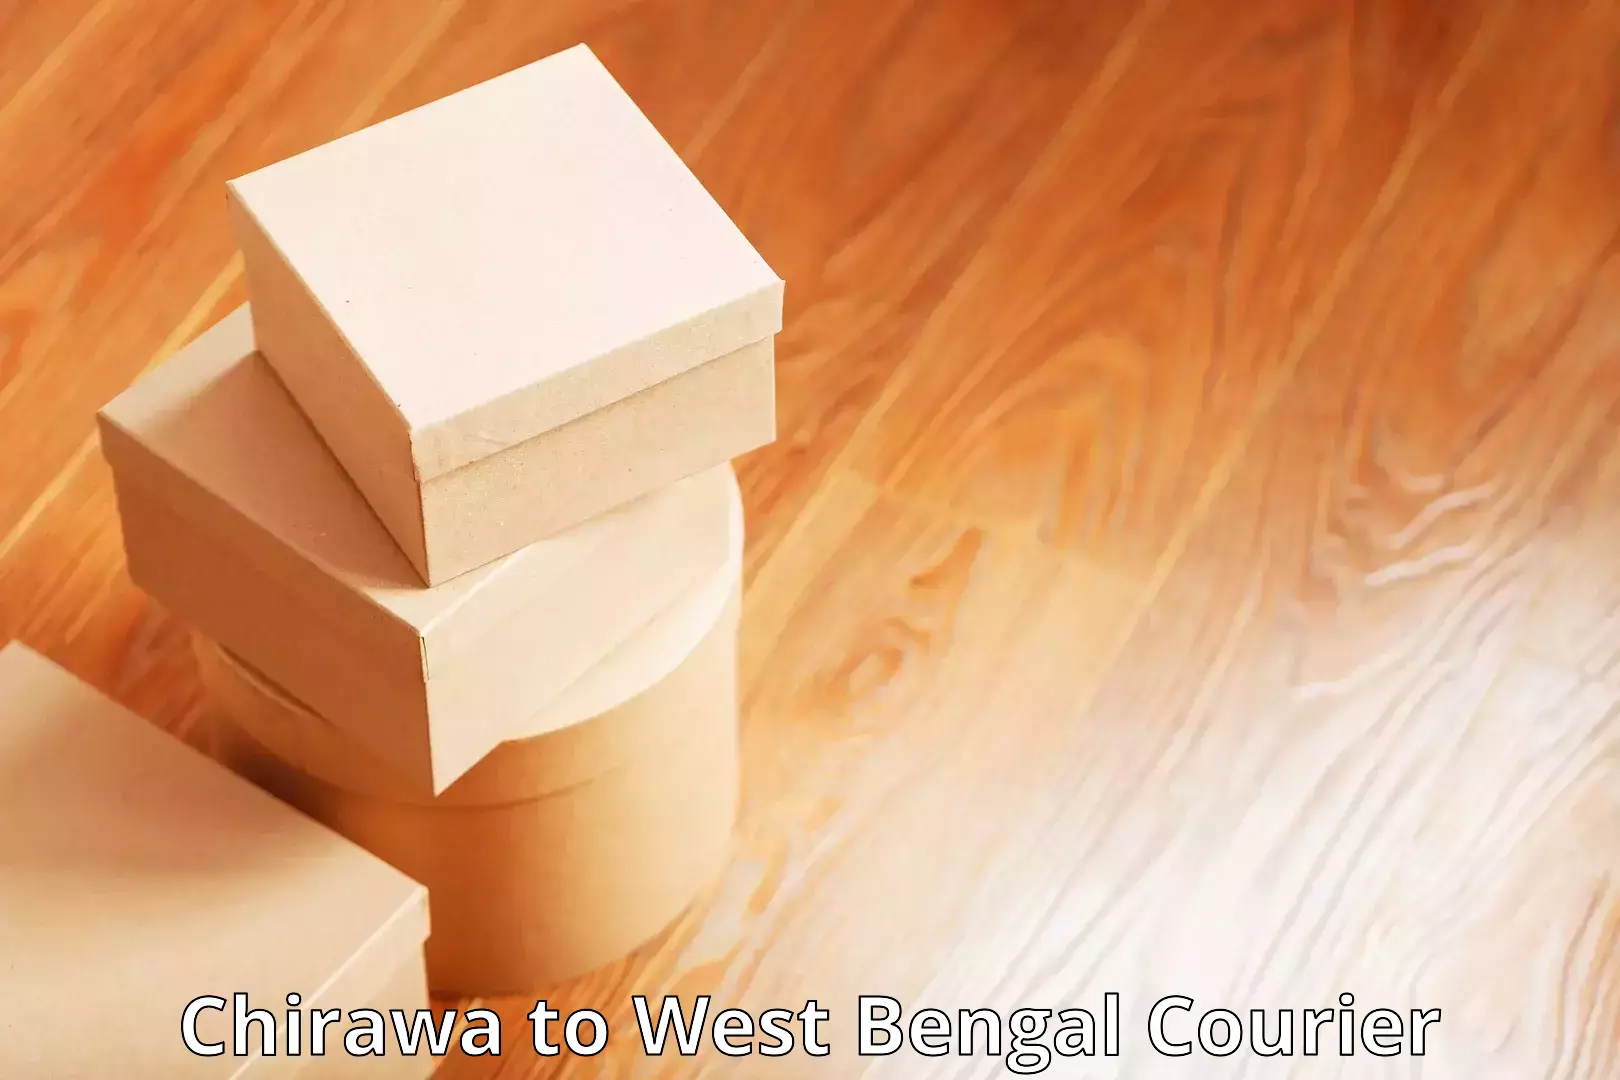 Courier service booking Chirawa to West Bengal